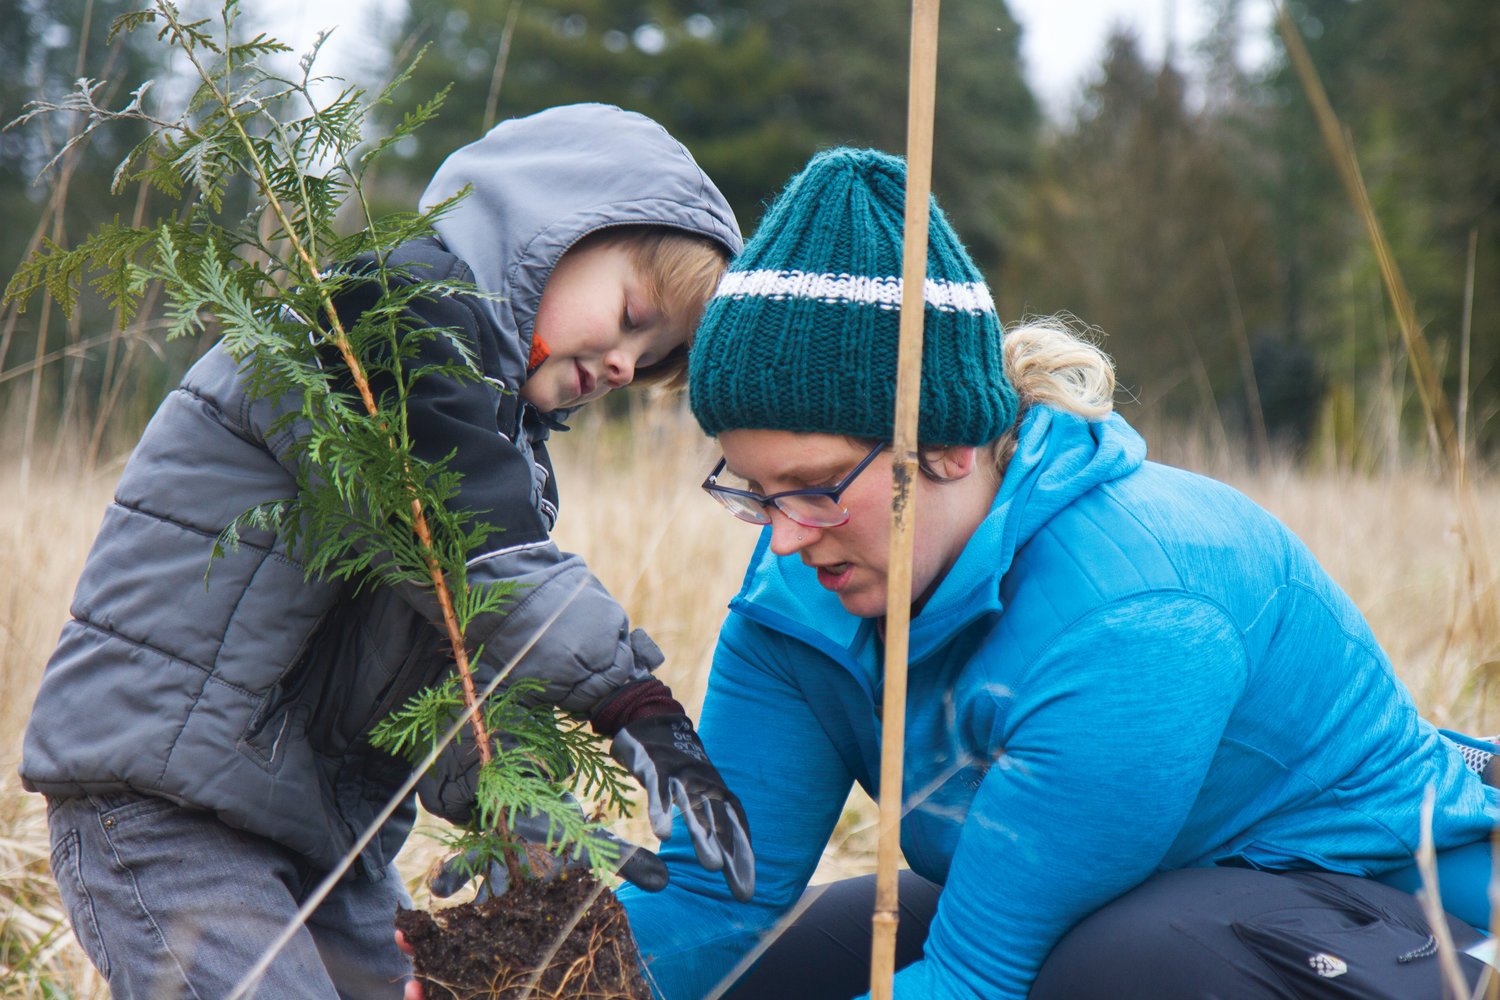 Brighton Stafford and Andrea Stafford work together to plant a cedar sapling at the 13th annual Plant-A-Thon hosted by the Northwest Watershed Institute near Quilcene.